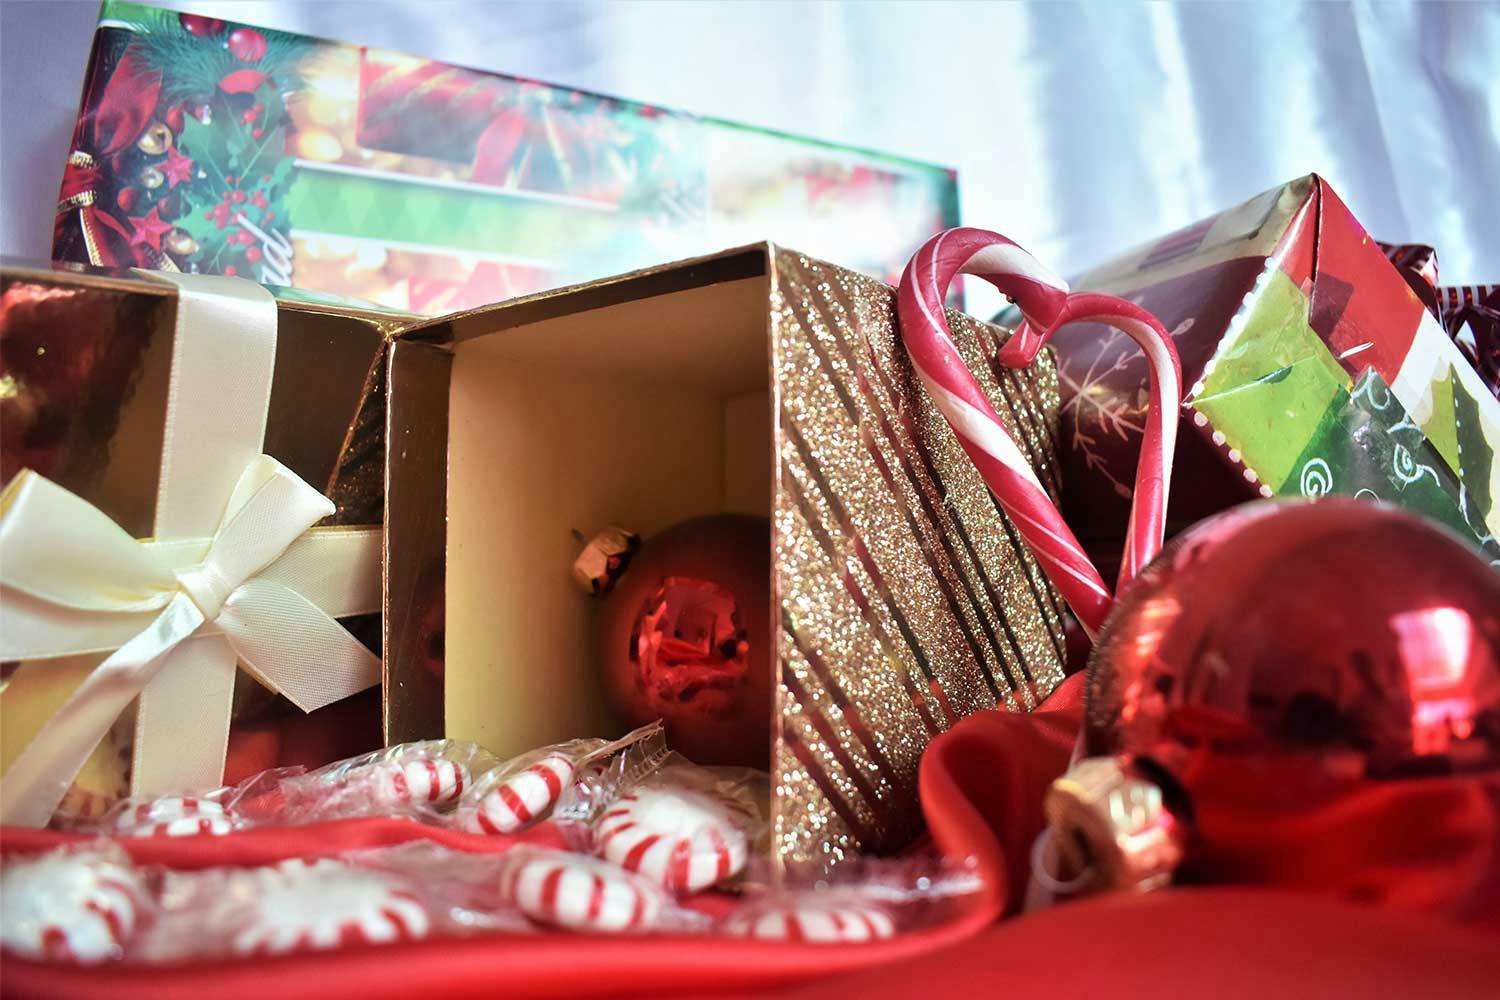 Red tree ornaments, plastic-wrapped mints, candy canes, and paper-wrapped & glitter-covered gift boxes arranged in a pile.